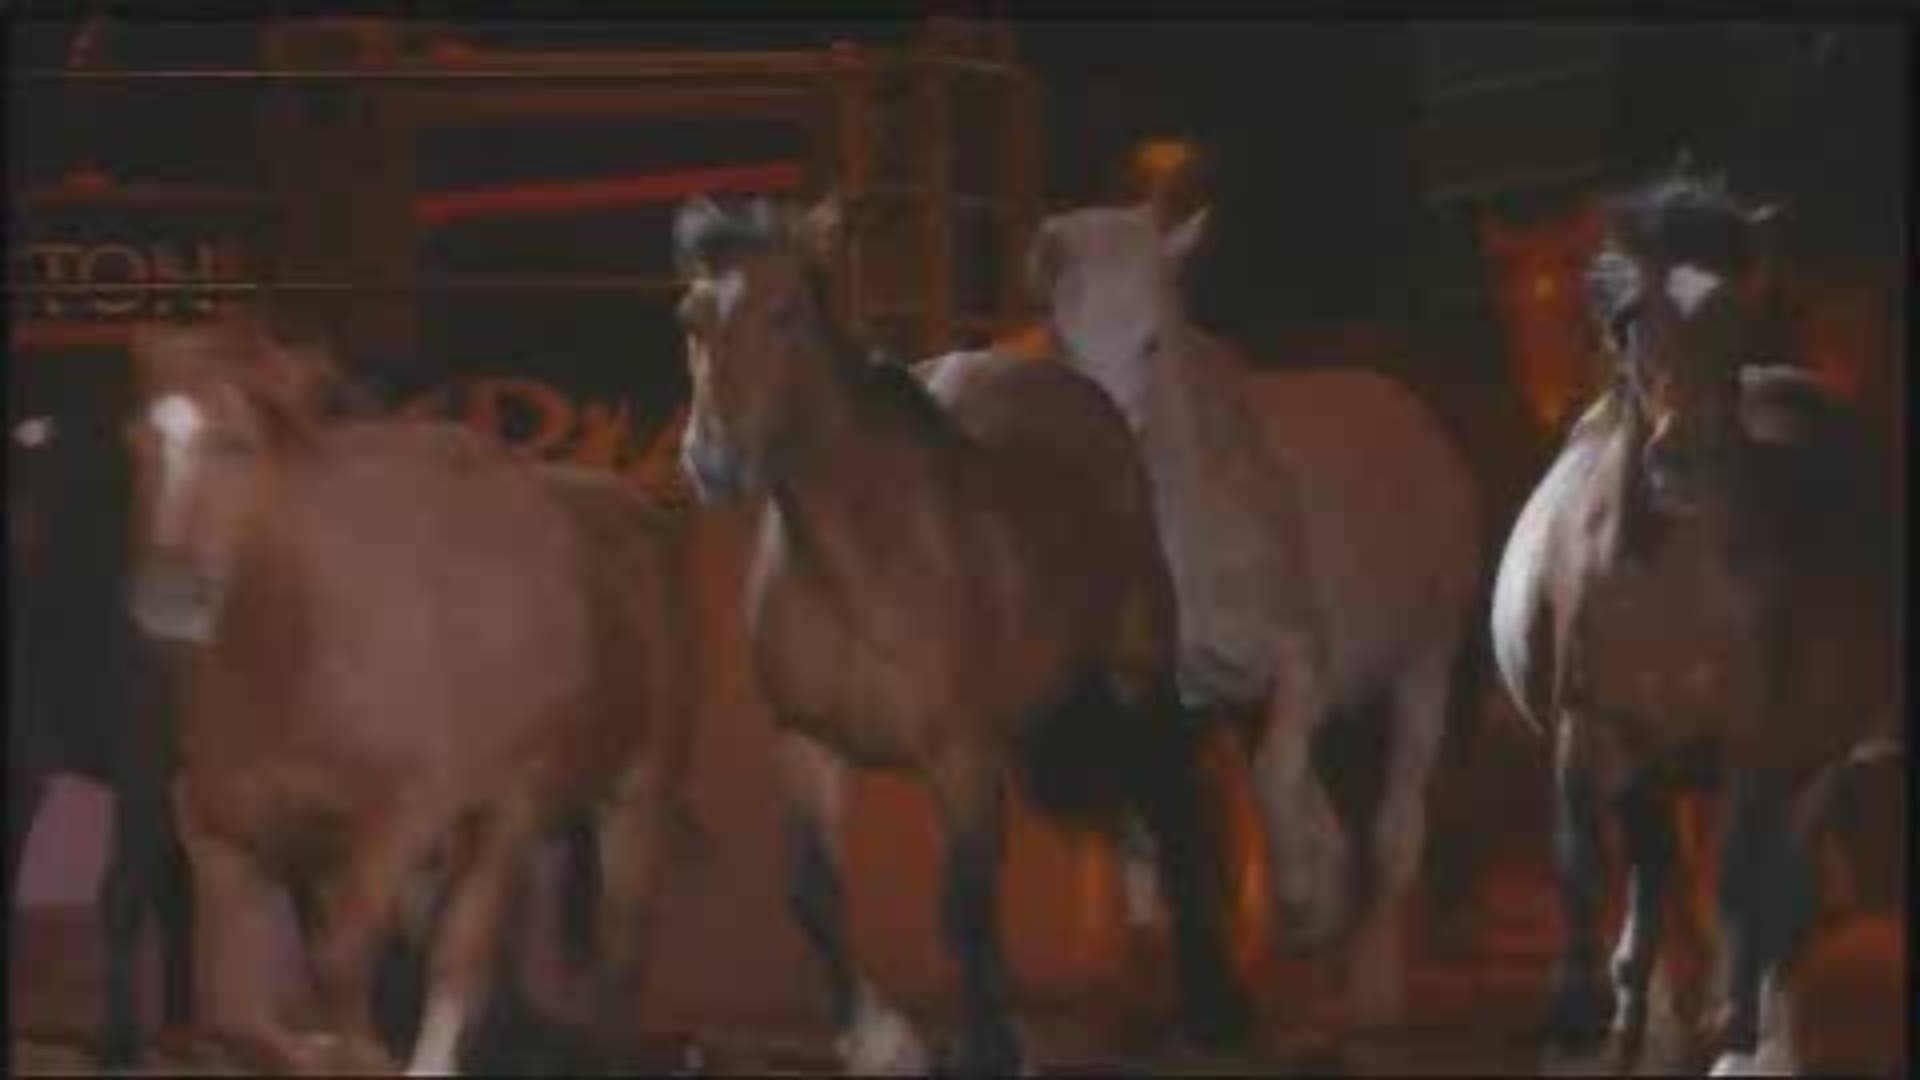 A beautiful tribute to bucking horses has proven to be a popular addition to RodeoHouston each night, even bringing some rodeogoers to tears.